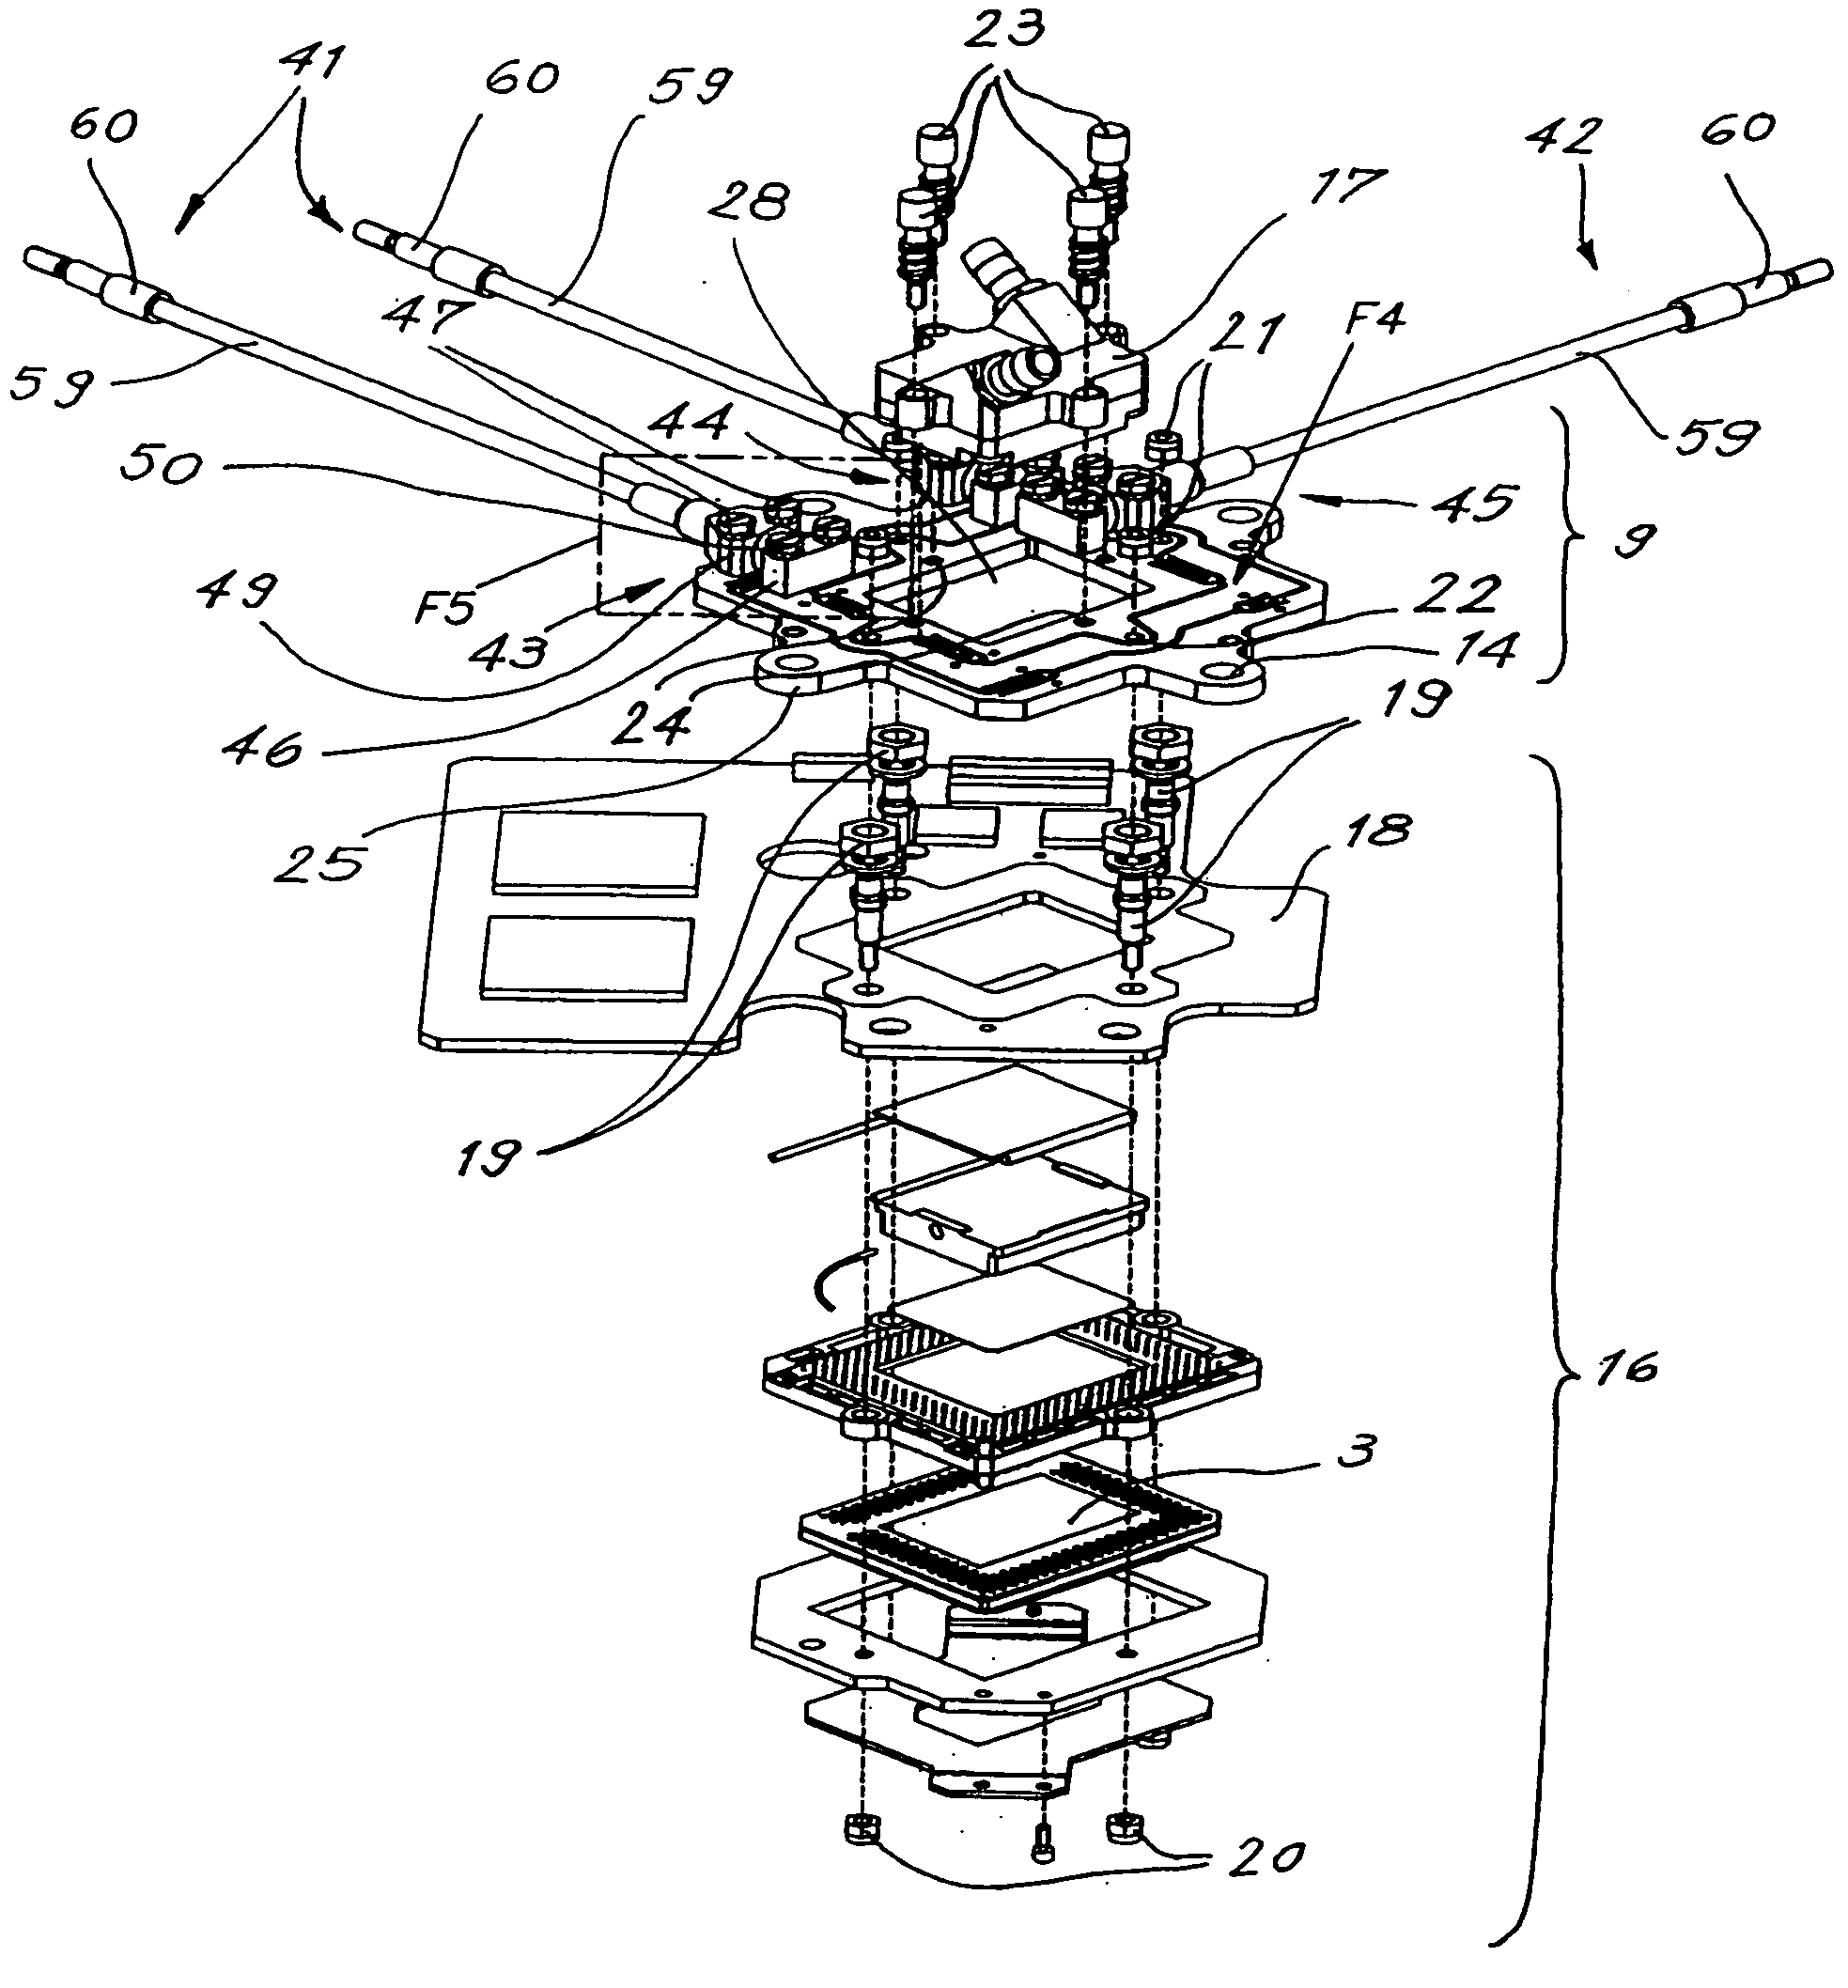 Adjustable convergence device for a projector and projector equipped with such a convergence device